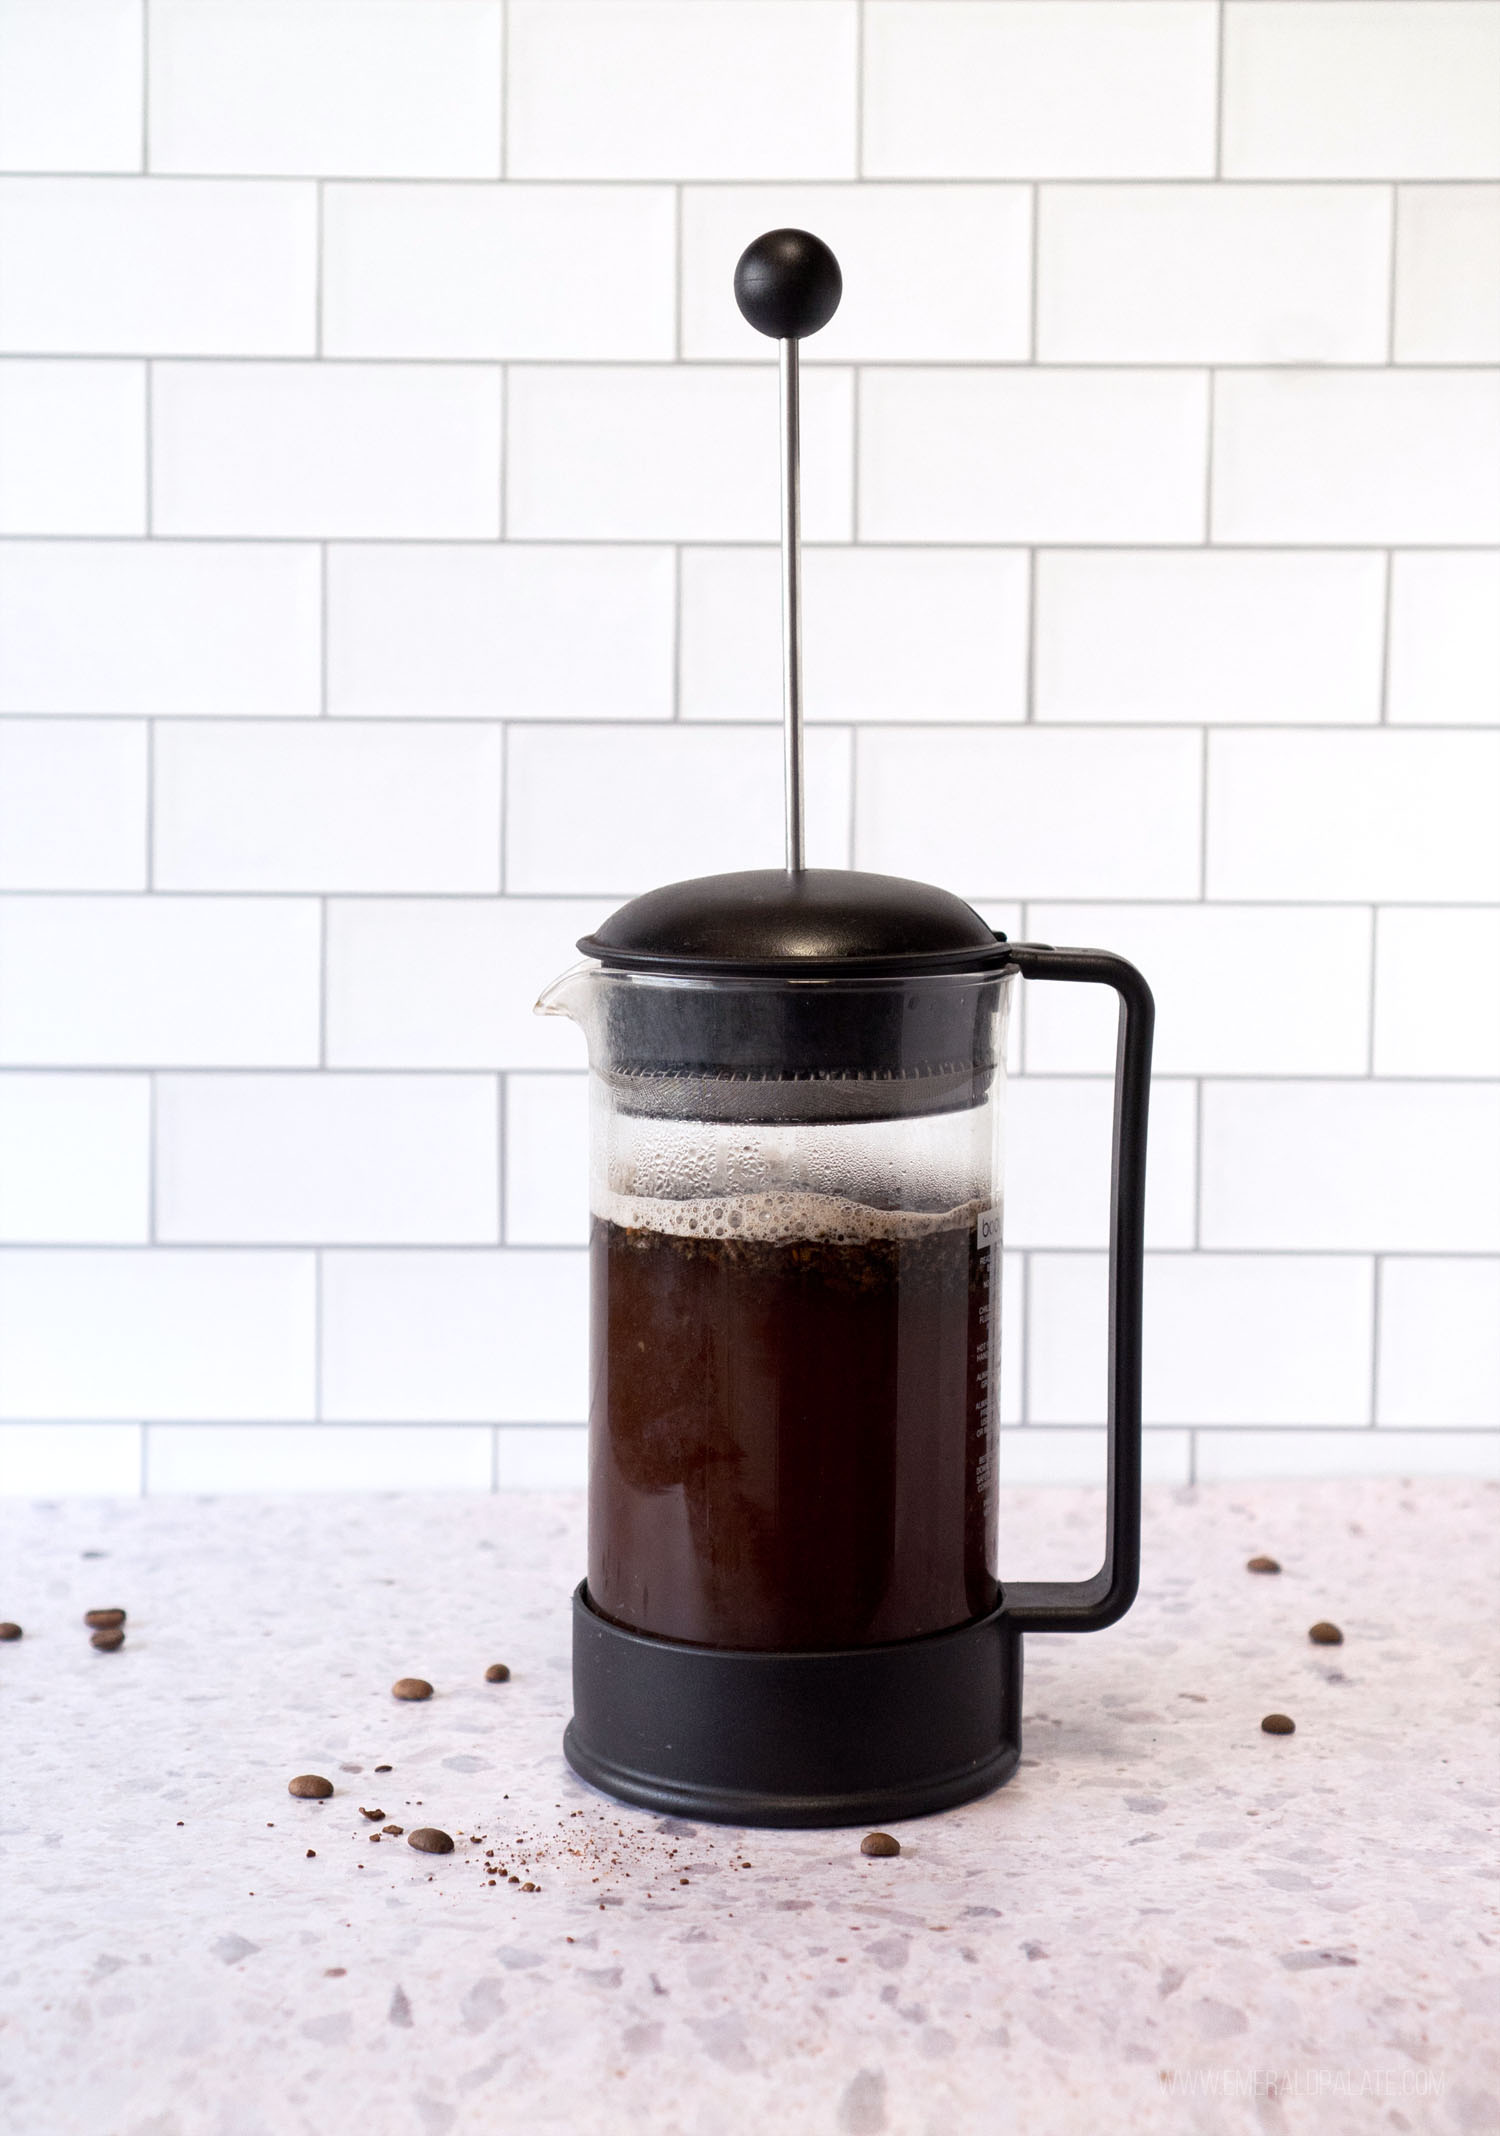 How to Use a French Press: From Coffee Ratios to Cold Brew [UPDATED]